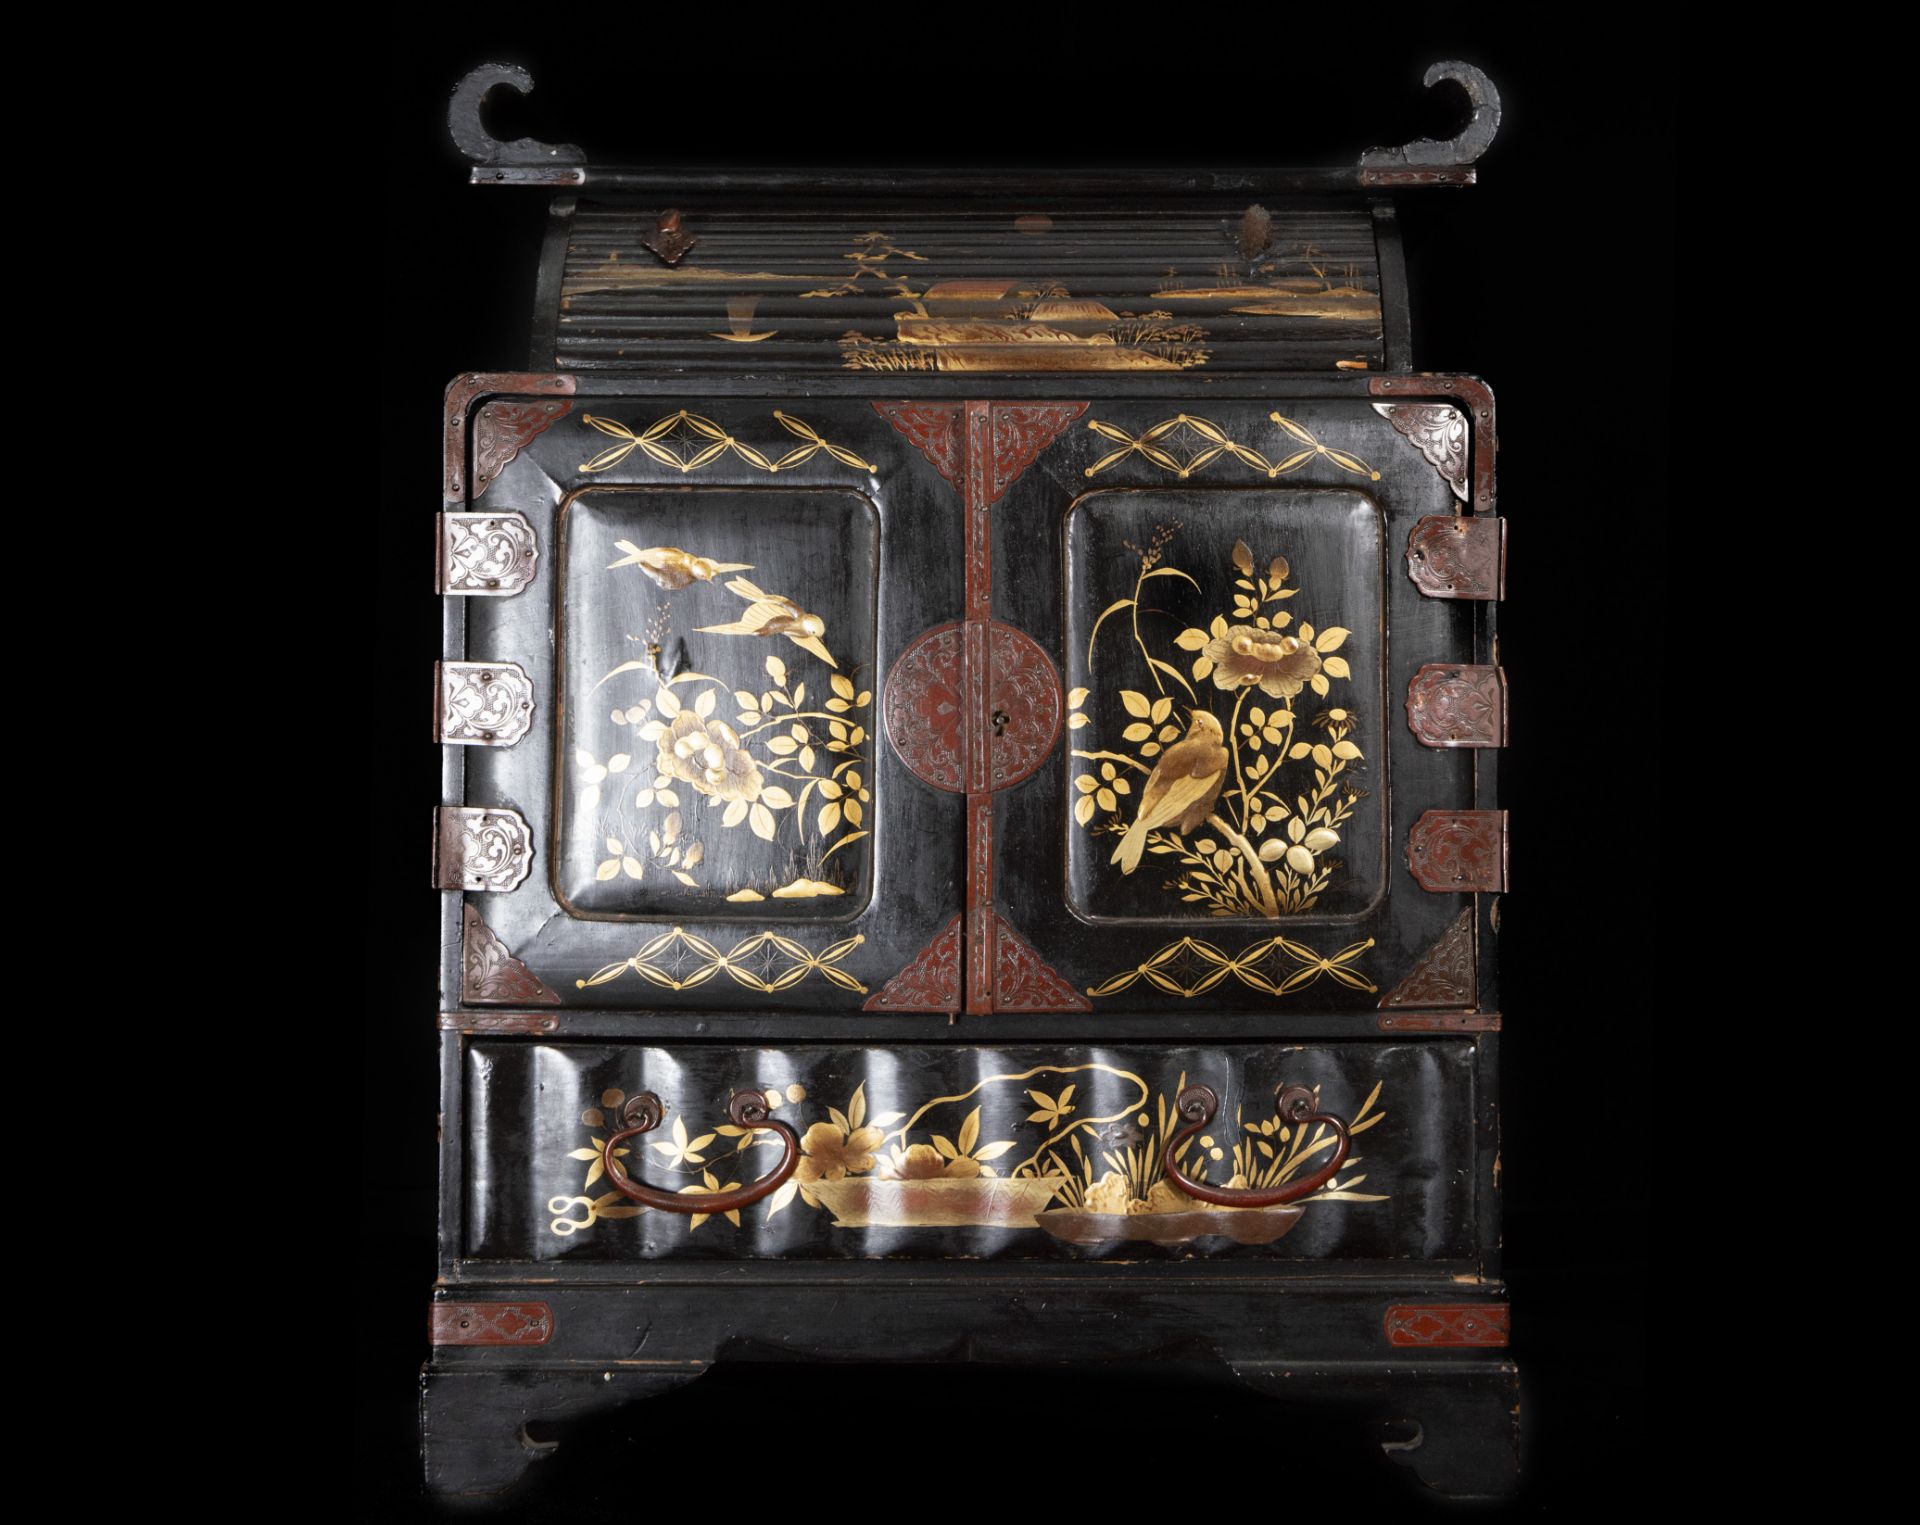 Exquisite Japanese Meiji tabletop cabinet in lacquered and gilded wood, 19th century - Image 4 of 8